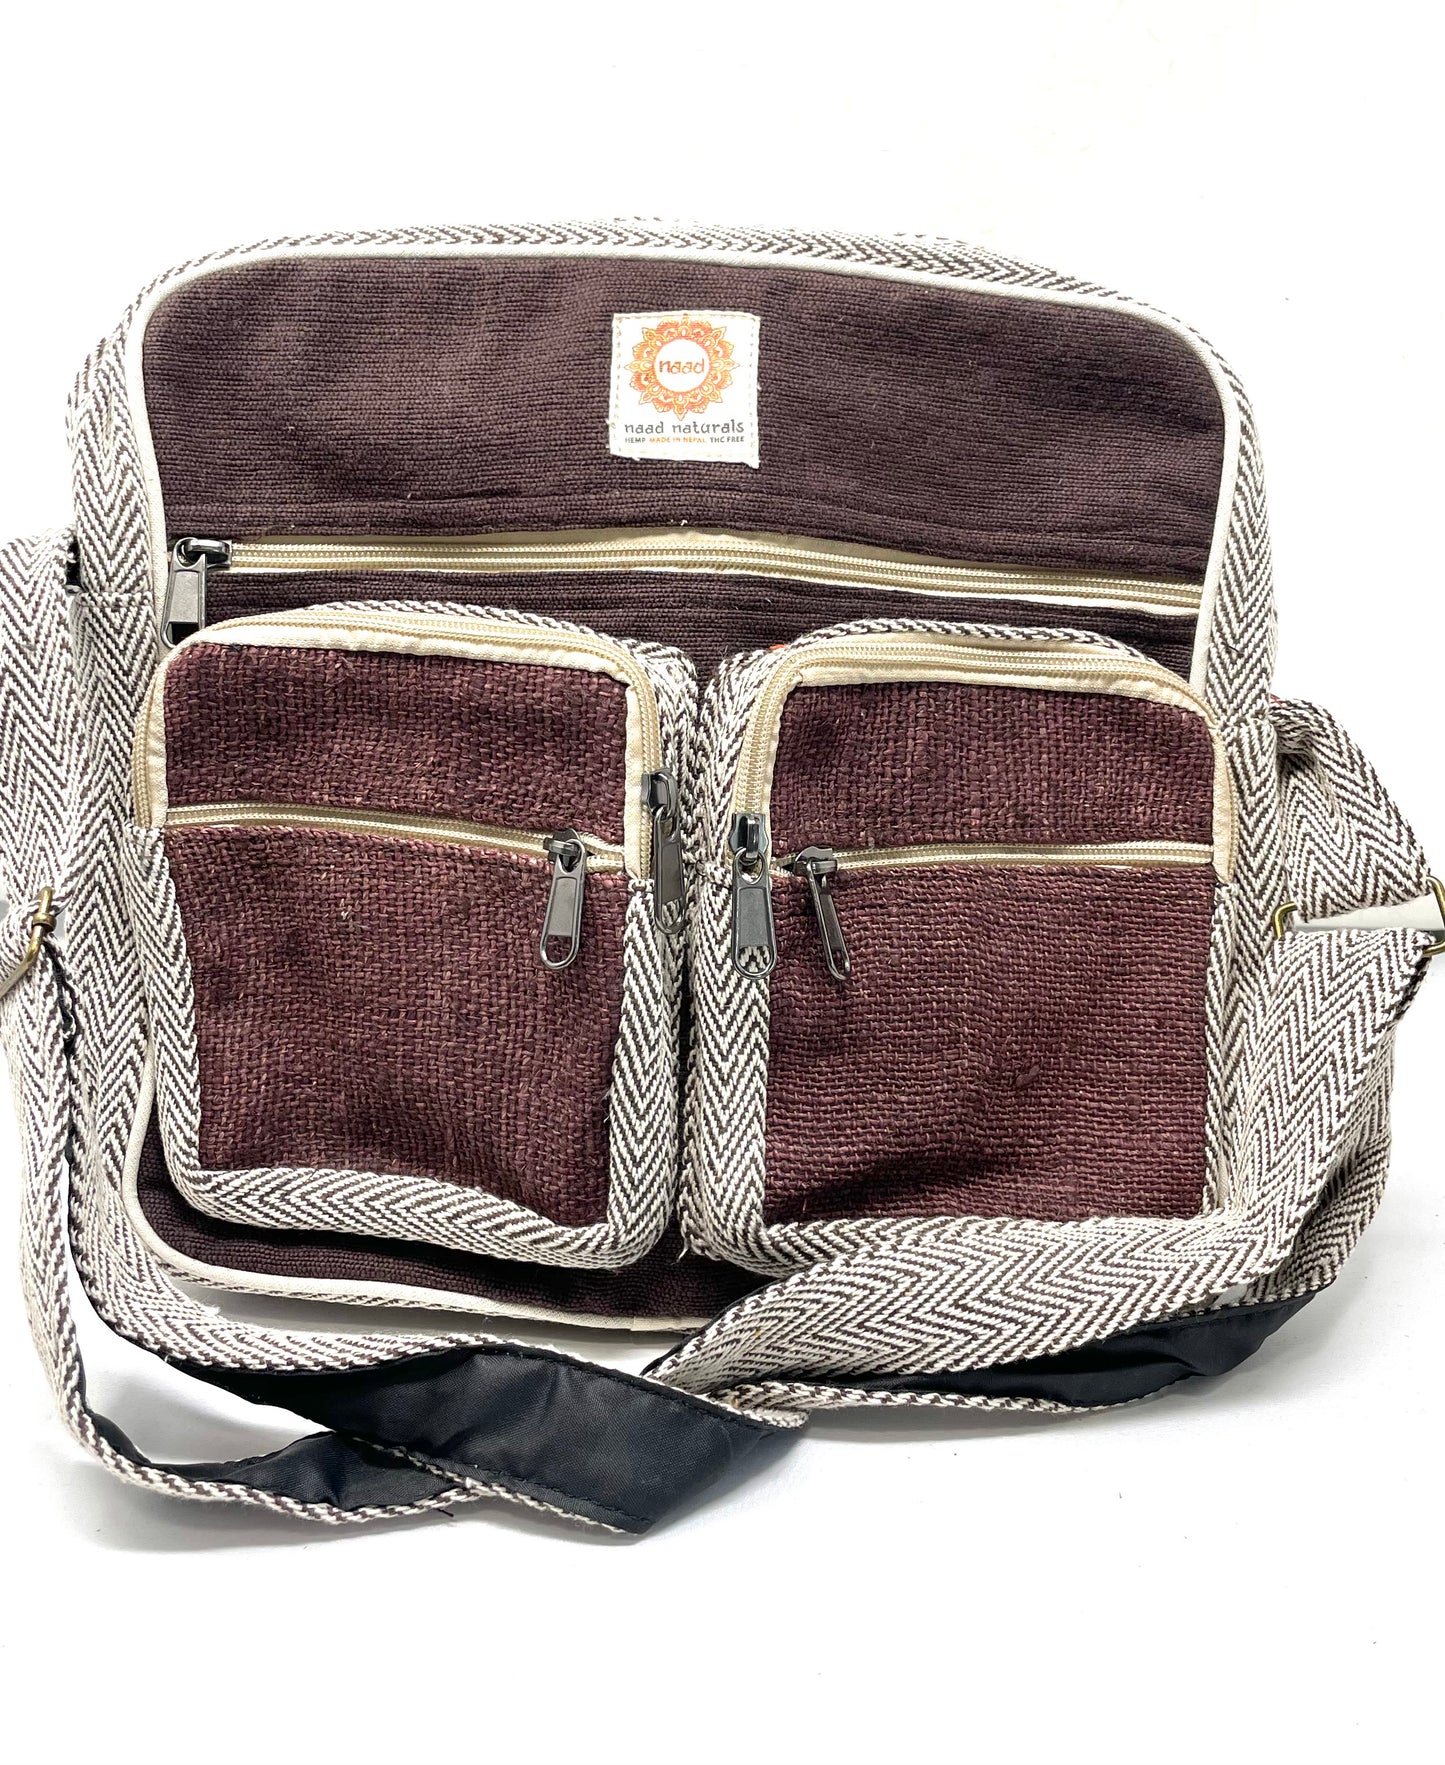 Hemp bag with 2 front pockets